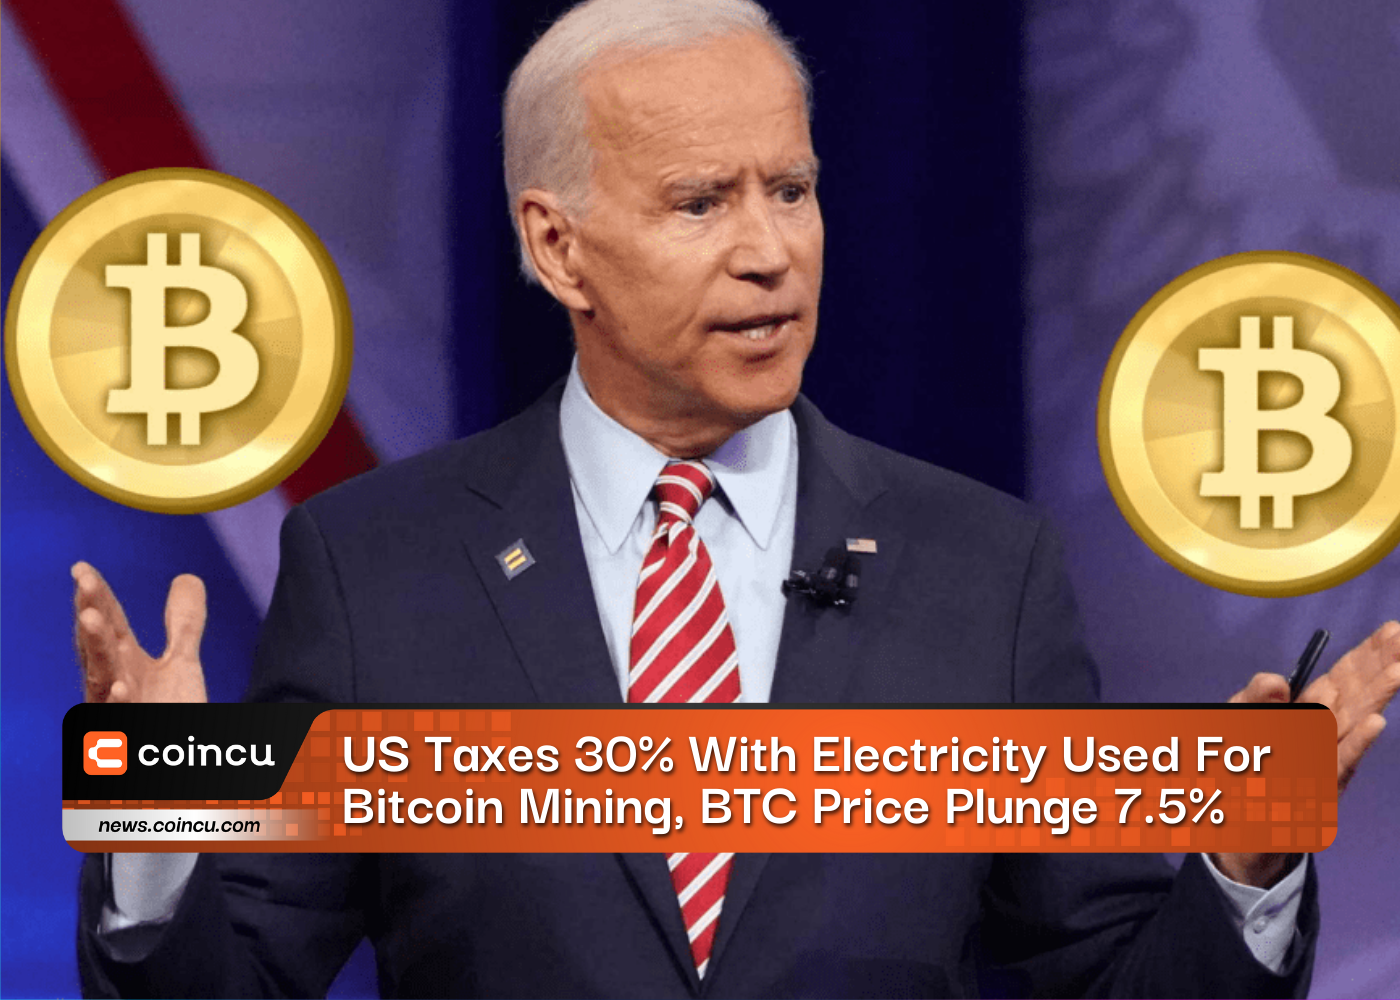 US Taxes 30% With Electricity Used For Bitcoin Mining, BTC Price Plunge 7.5%